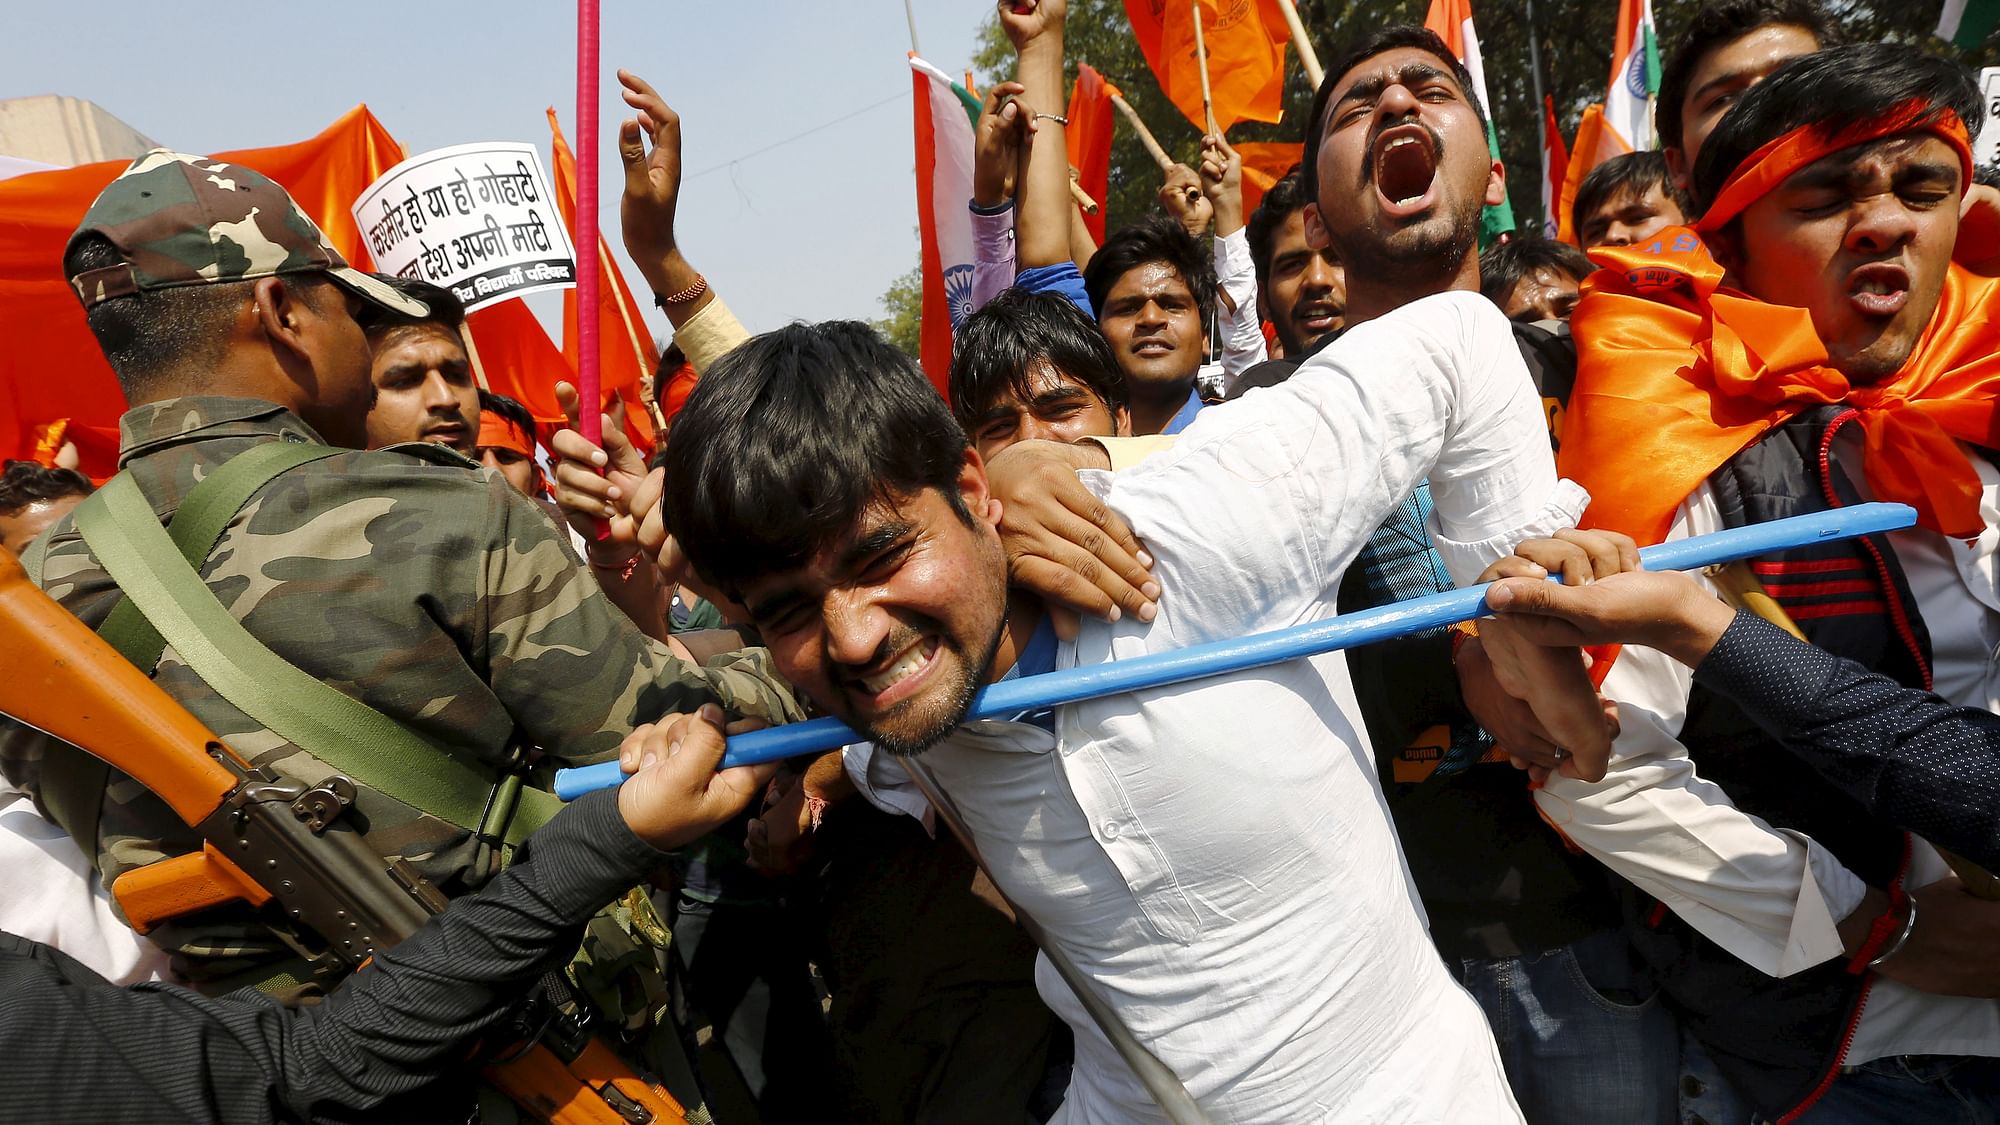 ABVP members, the student wing of BJP, scuffle with security personnel during a protest march in New Delhi on February 24, 2016. (Photo: Reuters/Adnan Abidi)